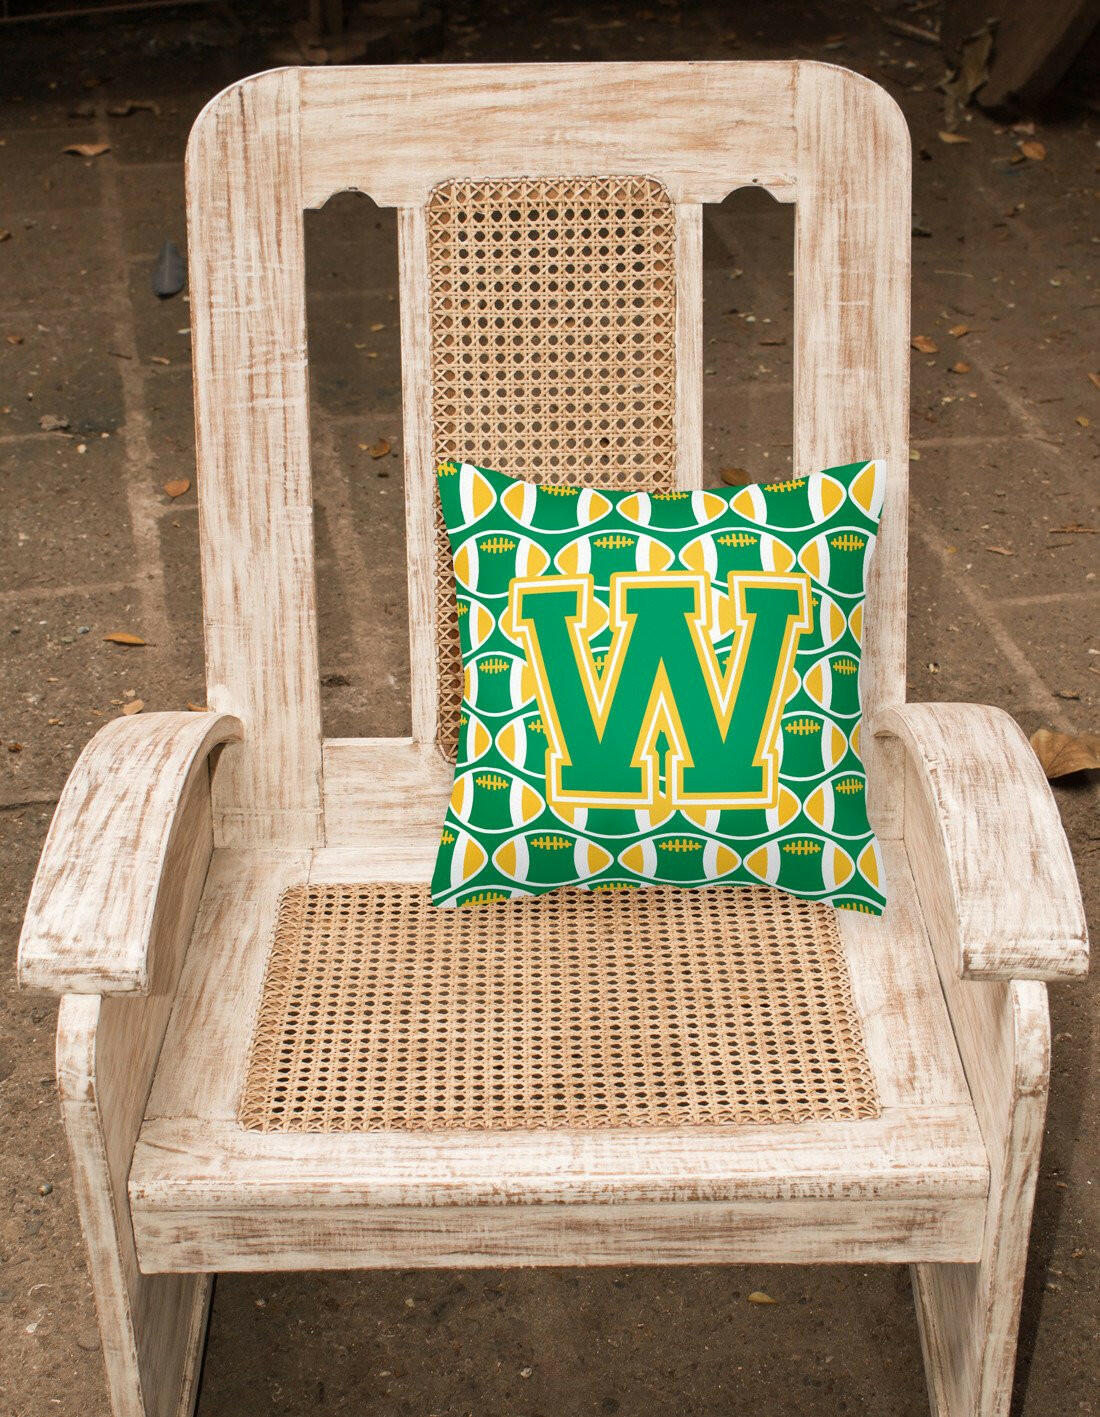 Letter W Football Green and Gold Fabric Decorative Pillow CJ1069-WPW1414 by Caroline's Treasures